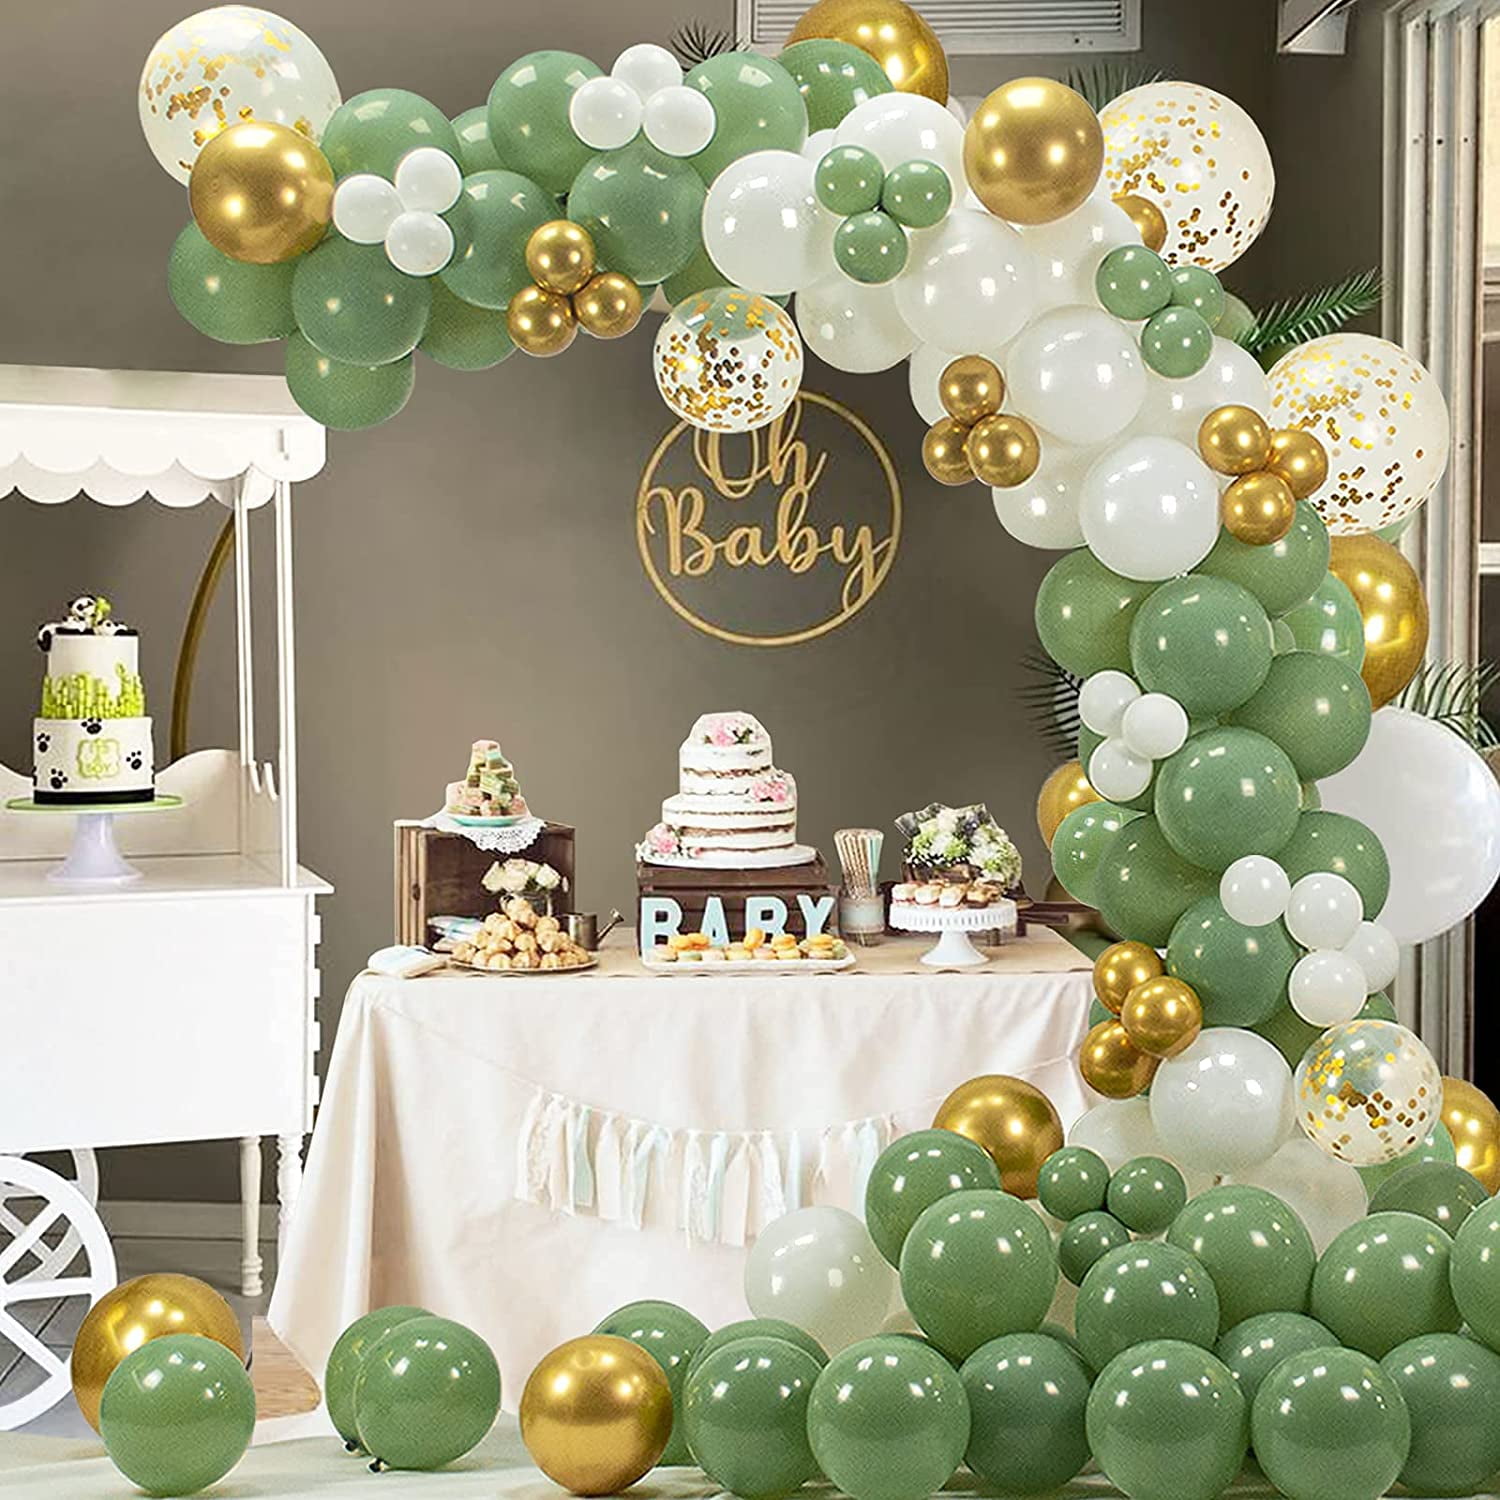 Details about   Large Foil Balloon BOY GIRL Baby Shower Party Decoration Birthday Christening